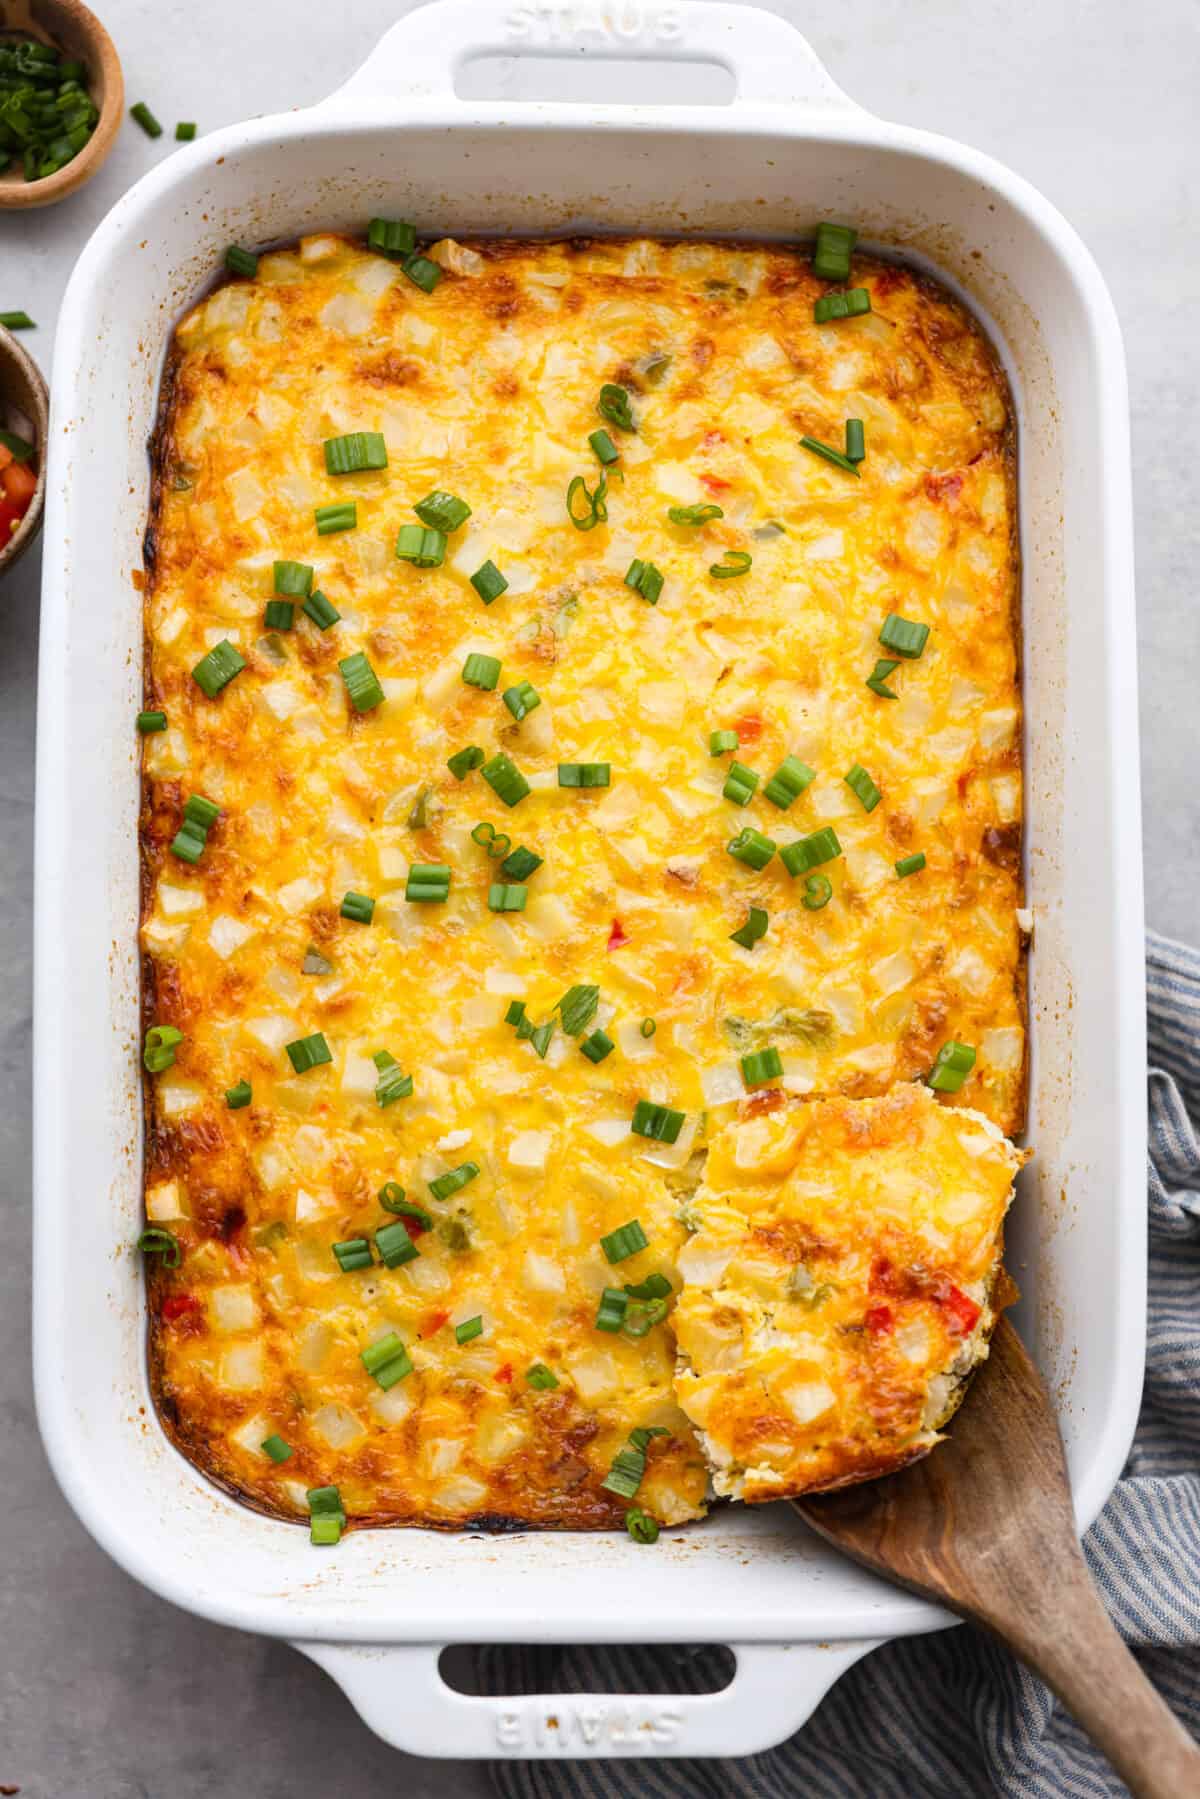 Top-down view of a baked breakfast casserole.